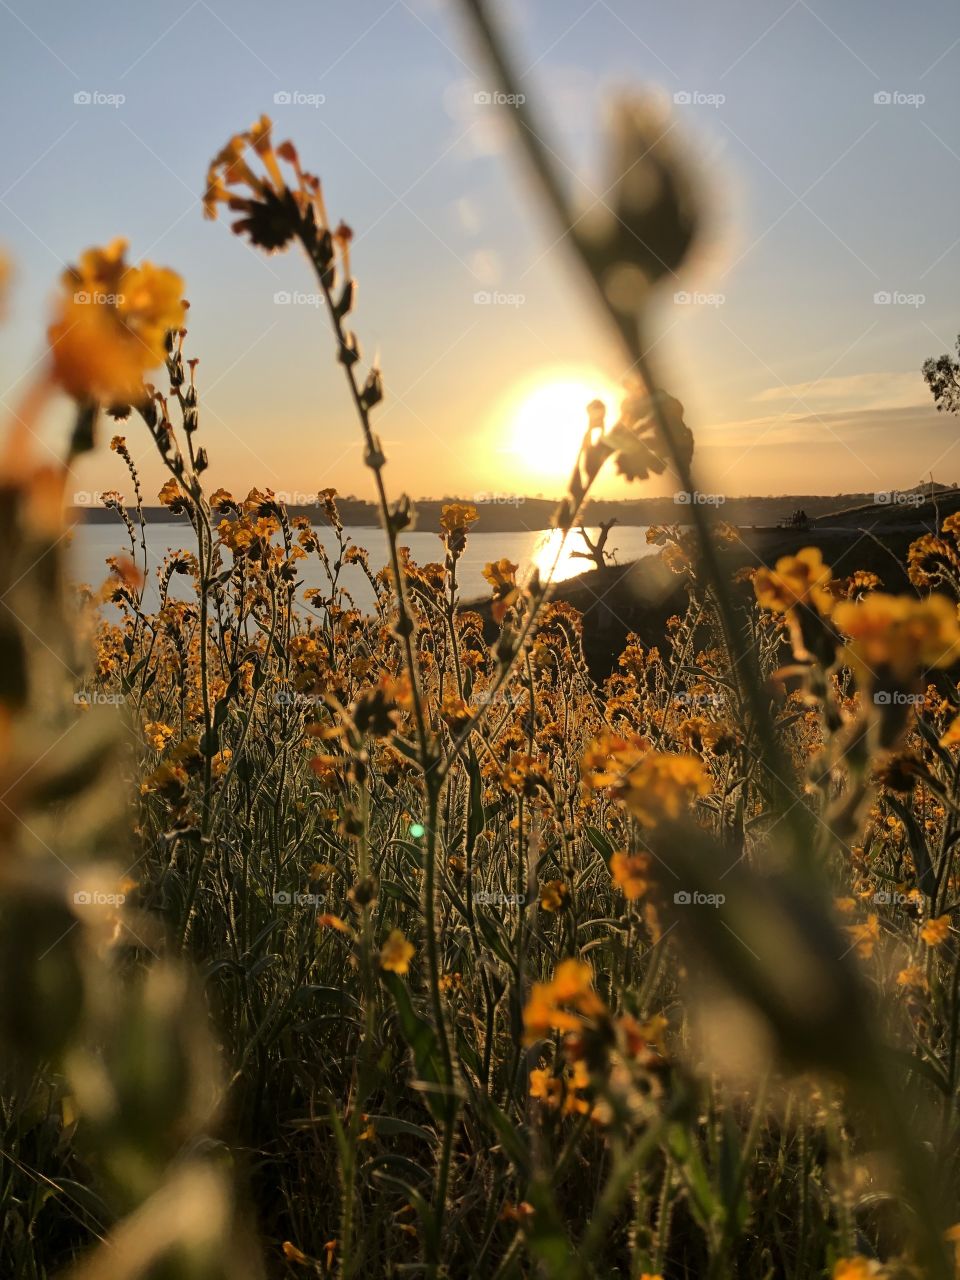 Flowers at sunset 